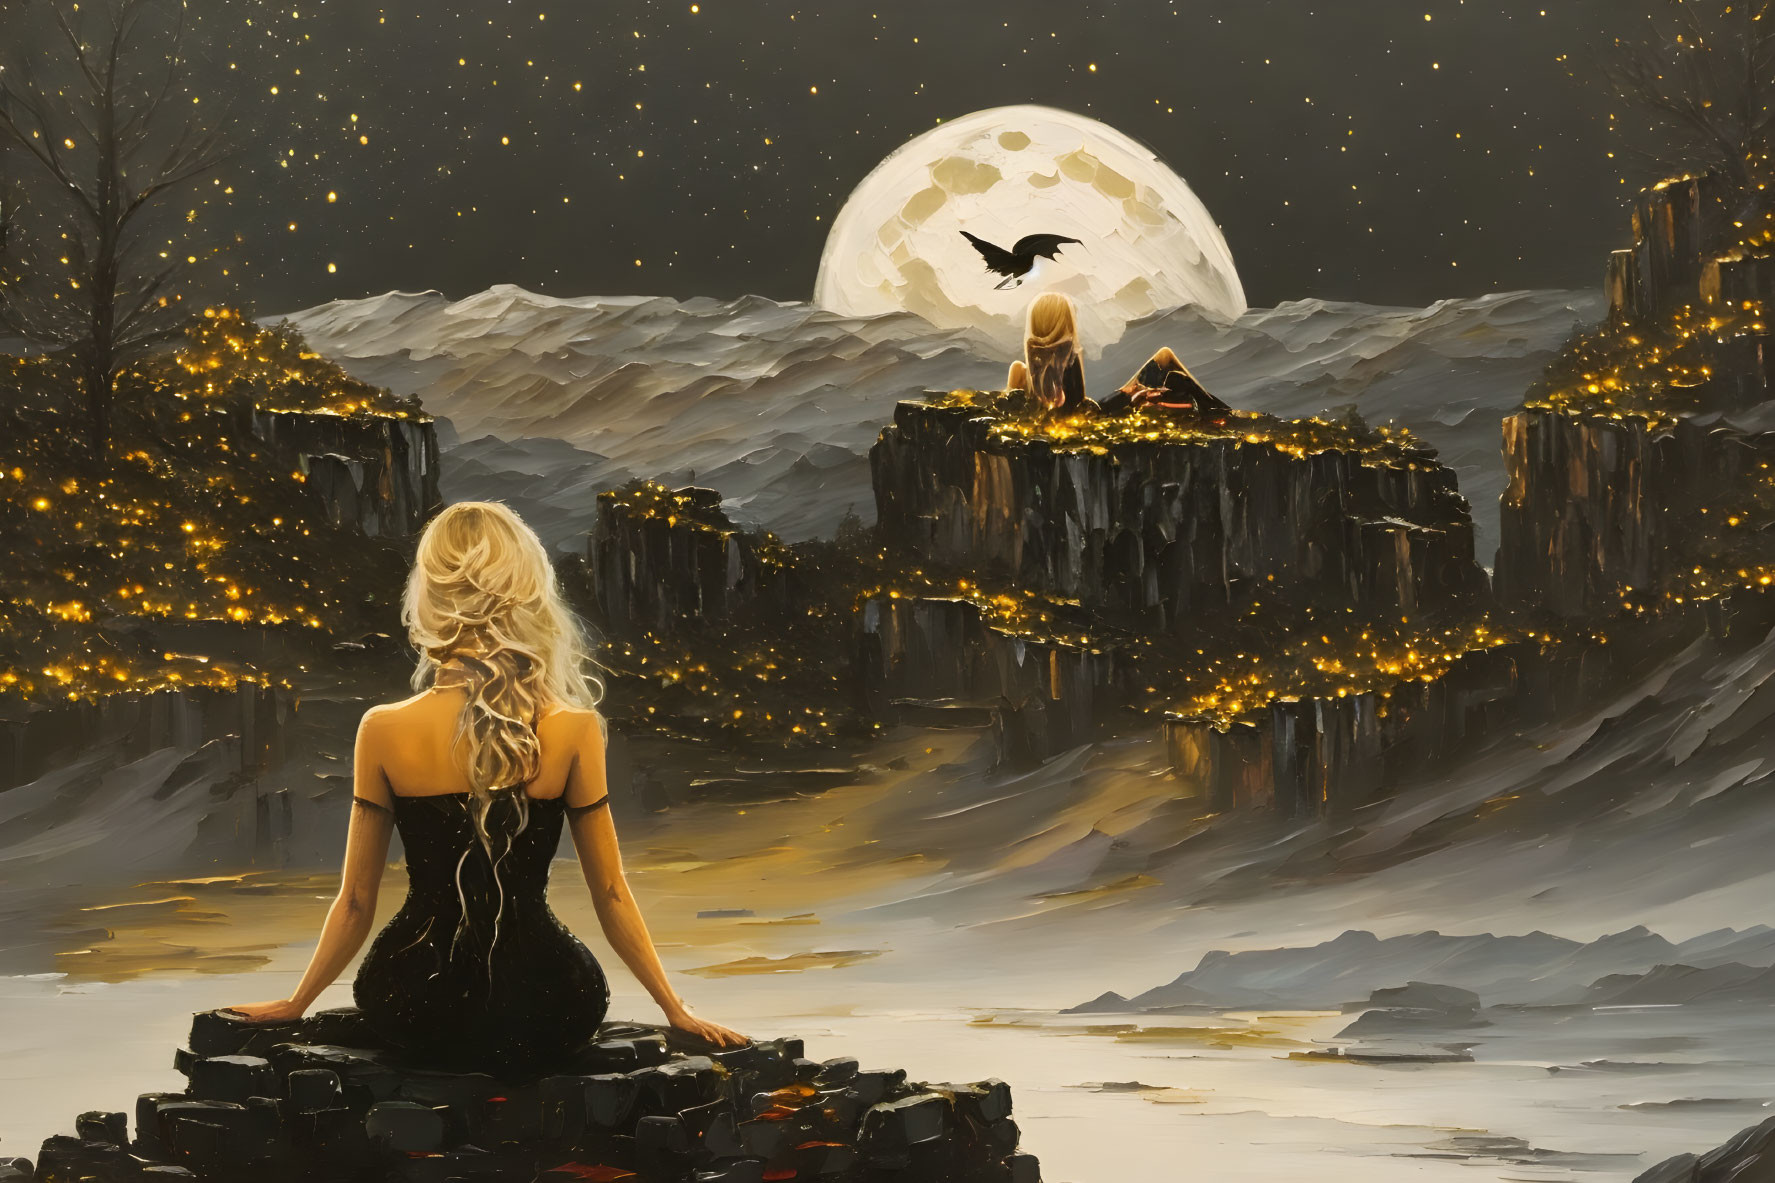 Blonde woman gazes at moonlit landscape with glowing gold foliage